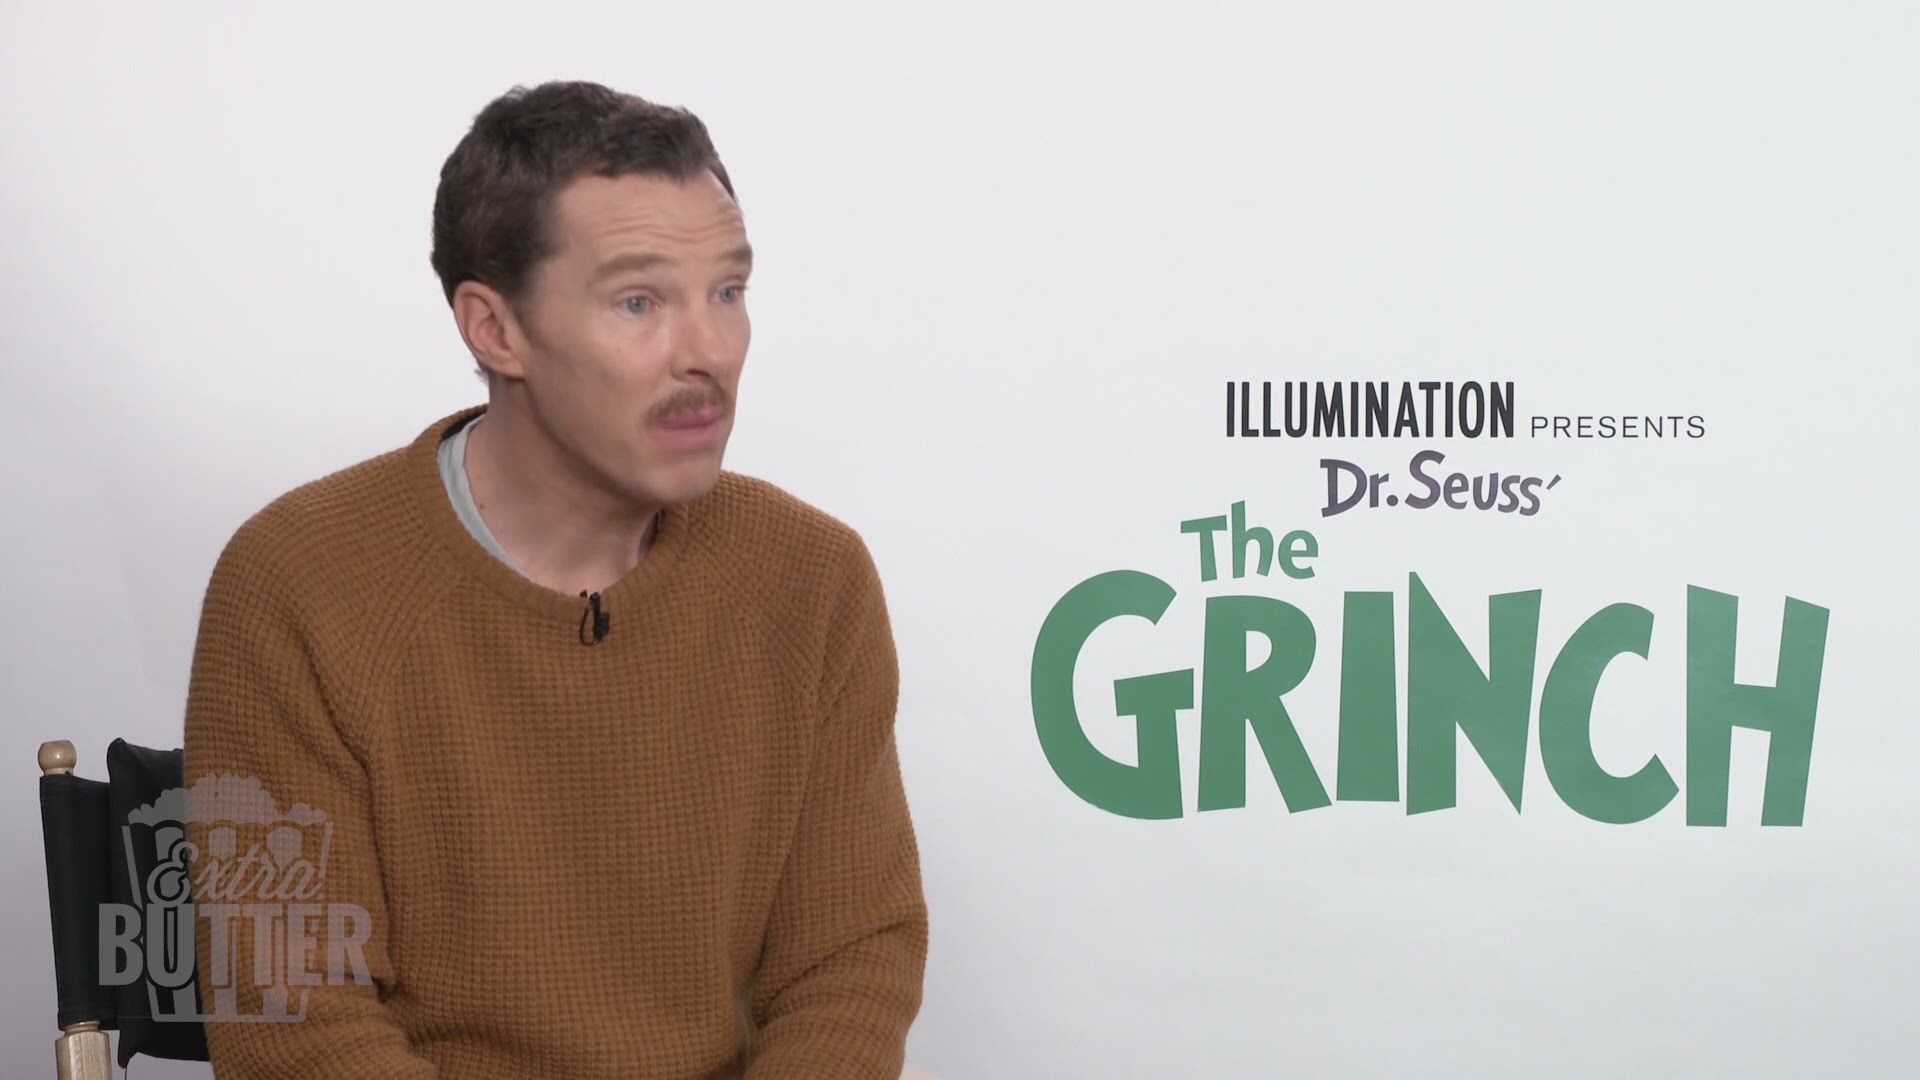 Benedict Cumberbatch sits down with Mark S. Allen's 5-year-old nephew to talk about playing The Grinch. Benedict answers tough questions about what makes him grinchy, the best gifts he ever gave and received. Plus Benedict talks about swimming in cold water.